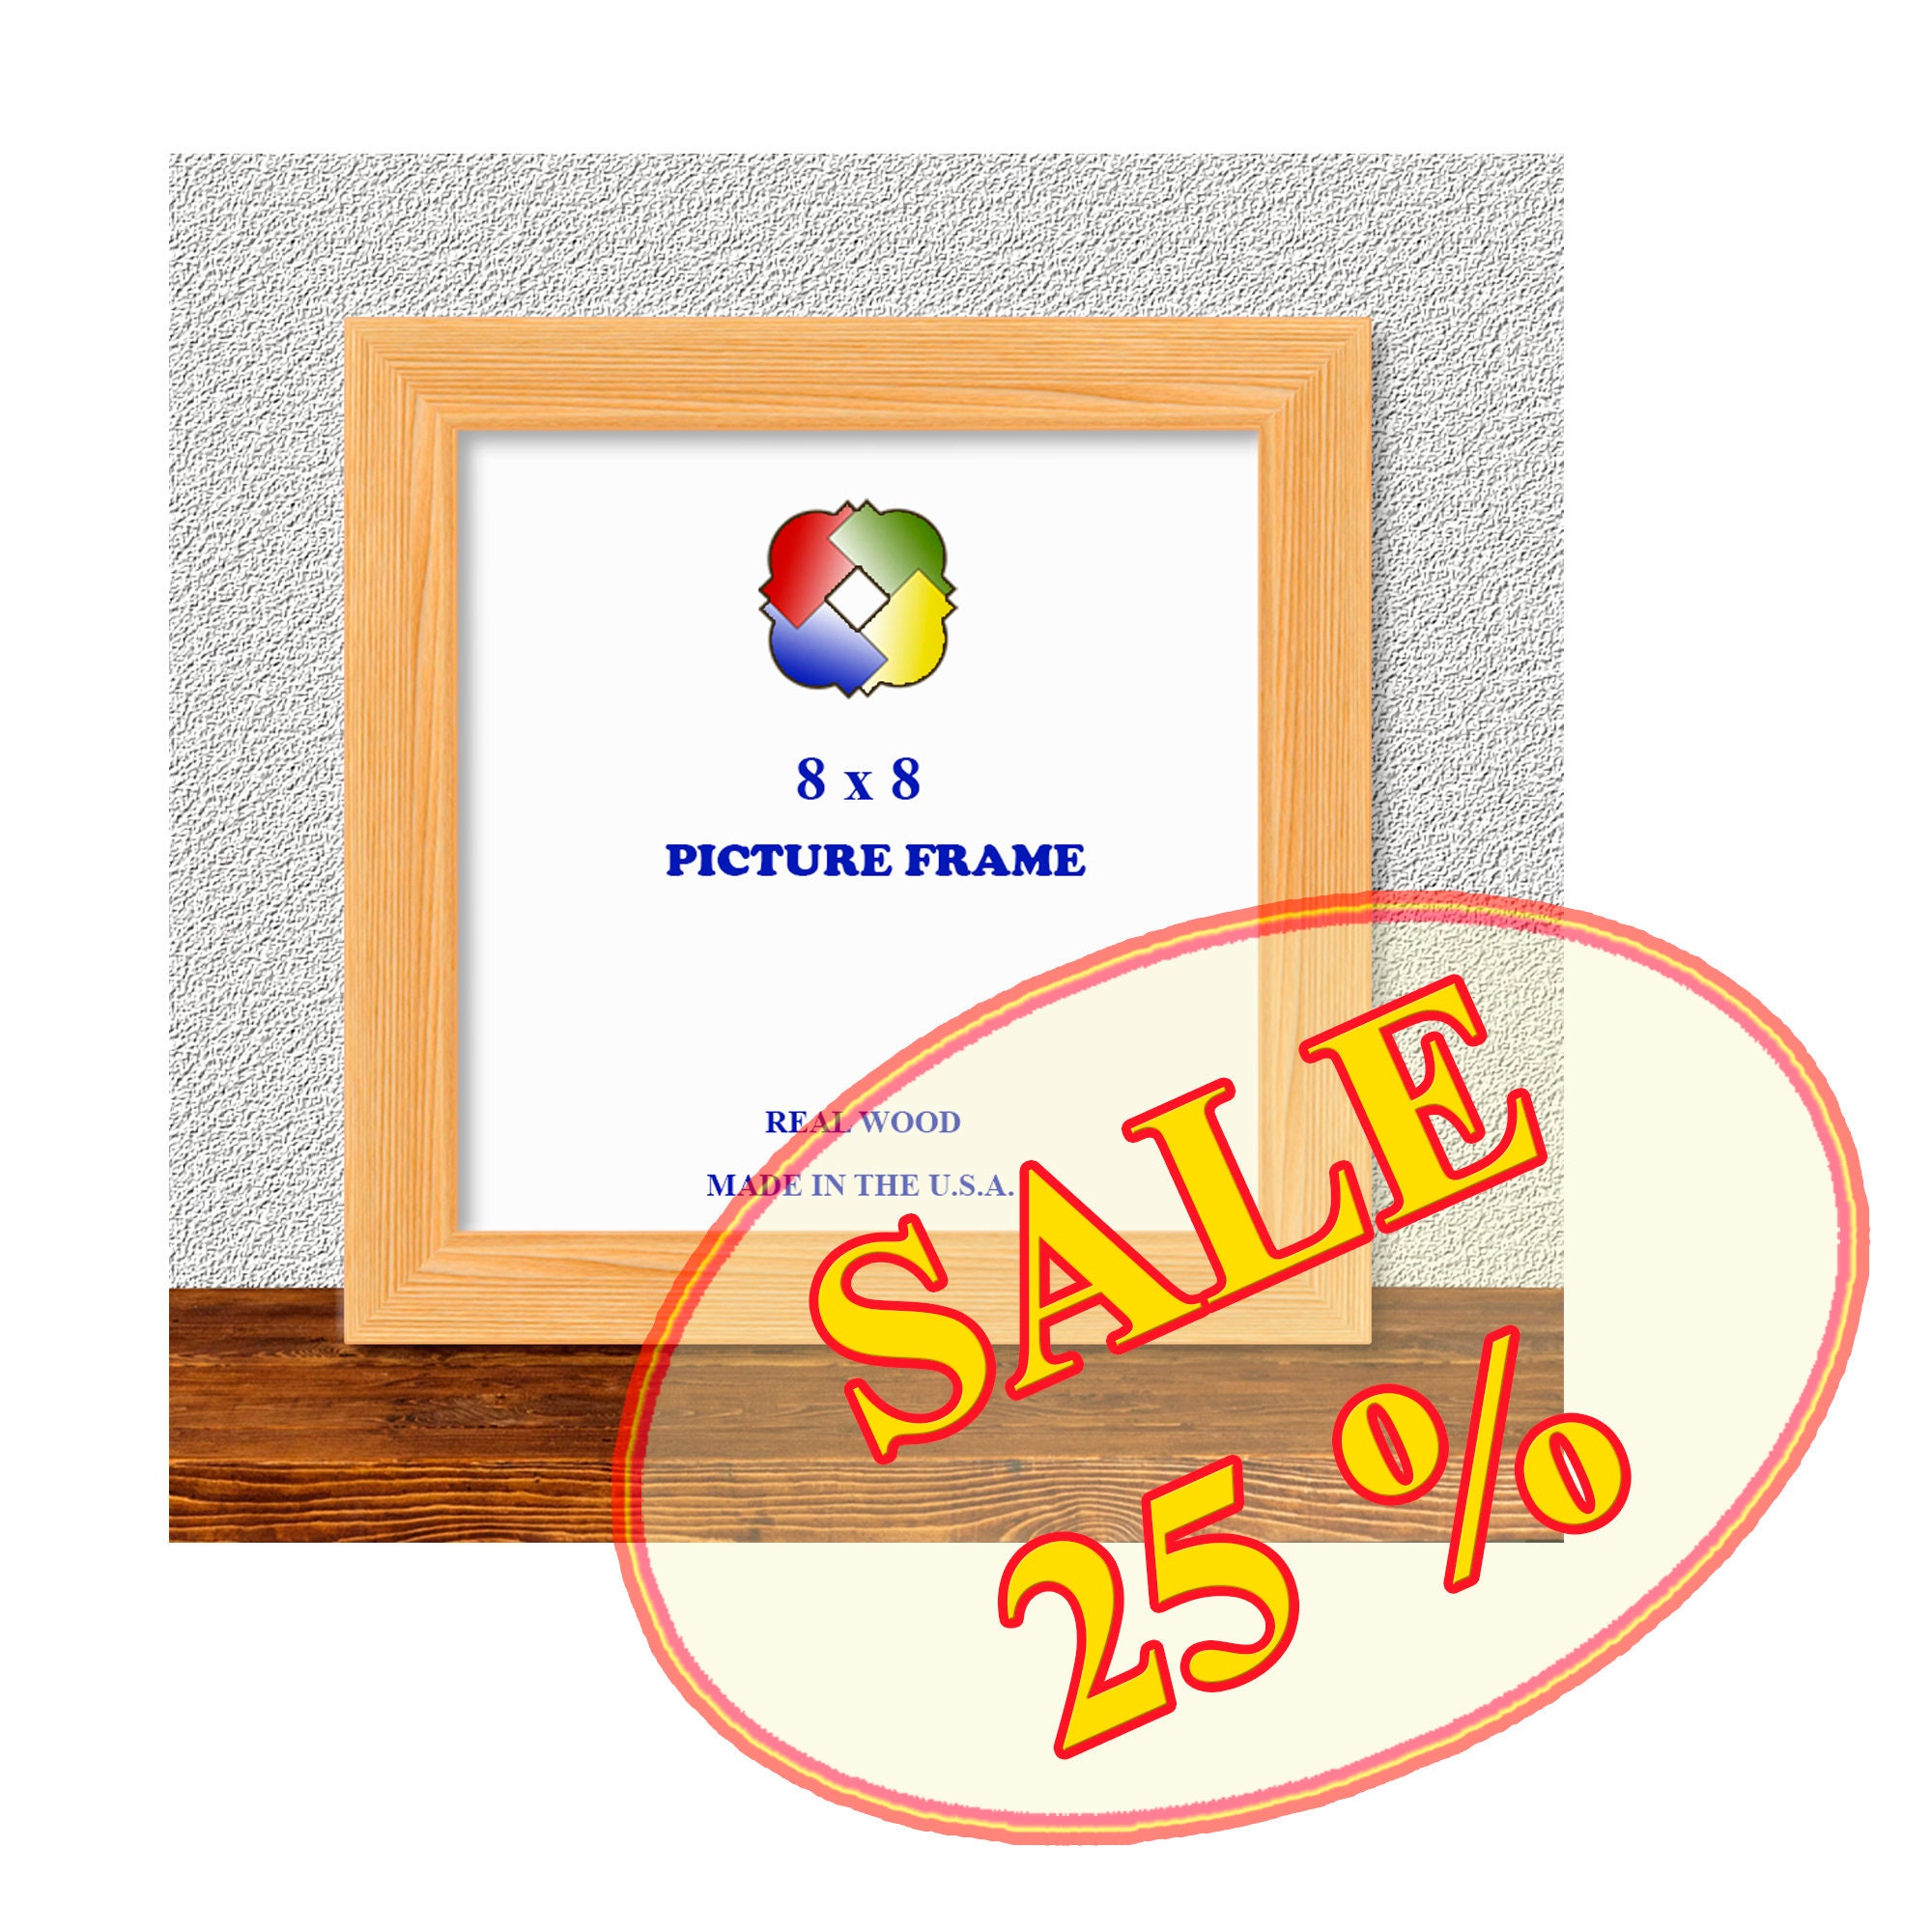 8x8 6x6 7x7 5x5 Square Wood Grain Picture Frame Wooden Photo Frame